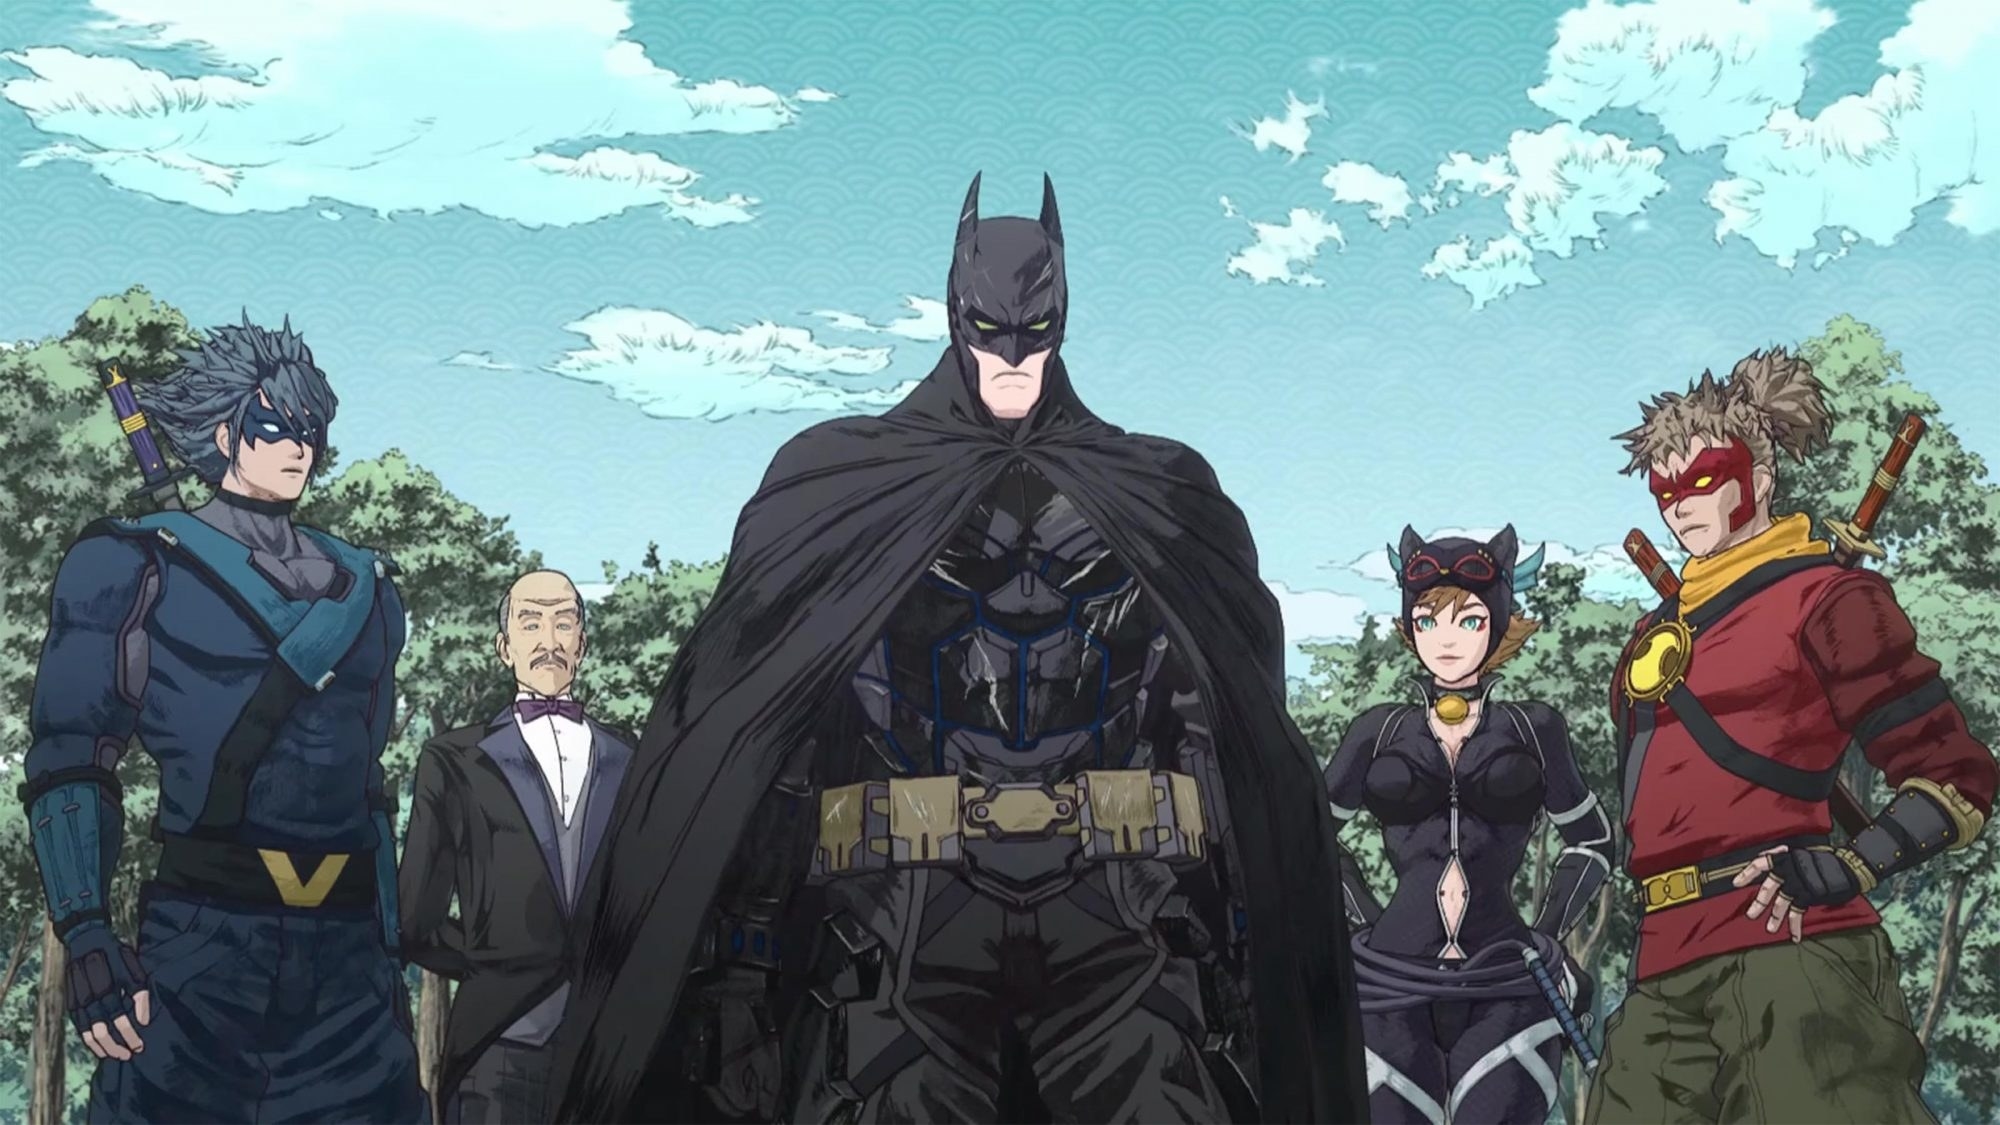 animated batman, alfred, and two other people in cat and superhero uniforms